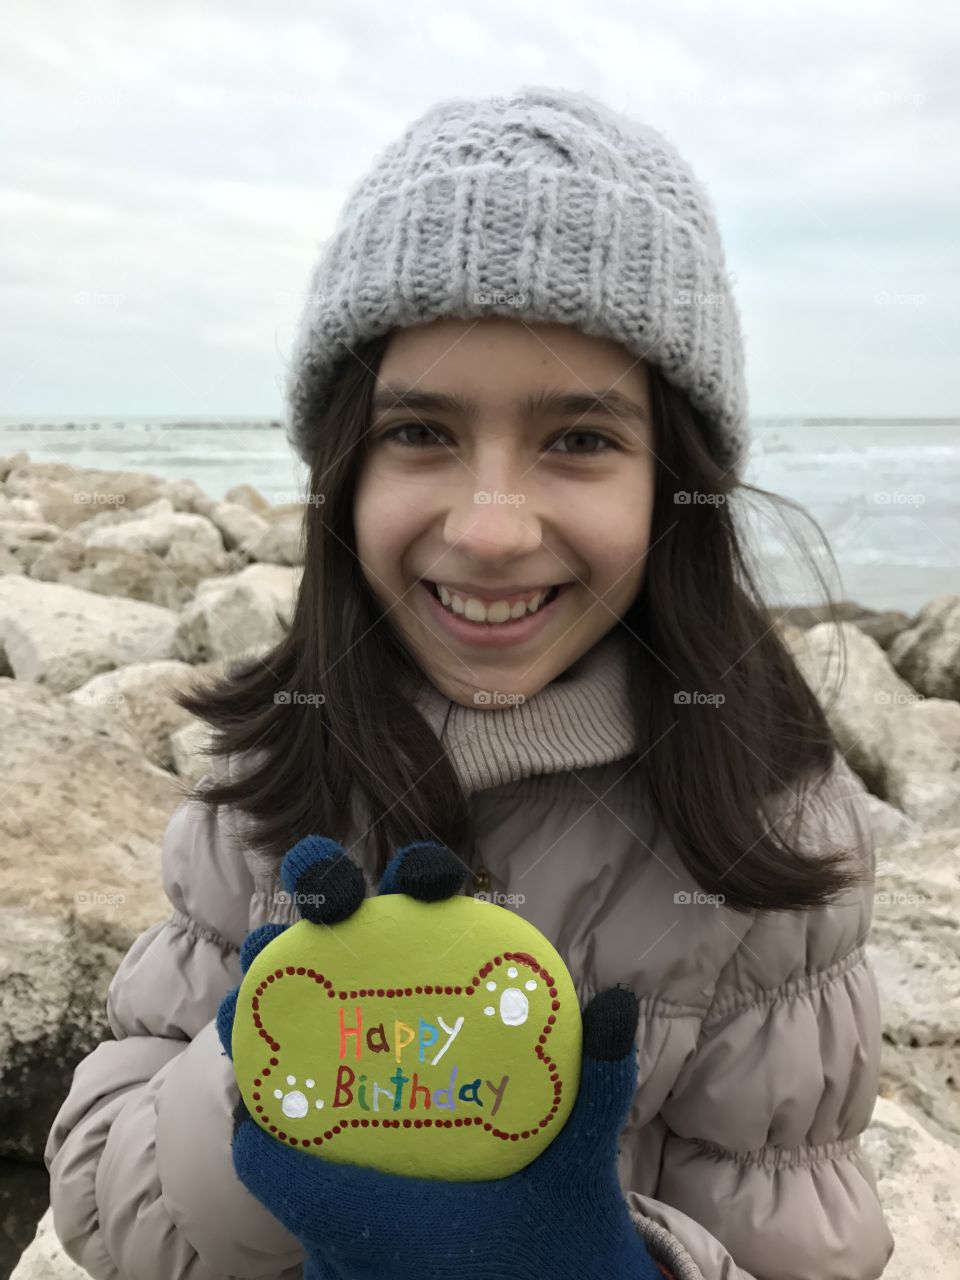 Smiling girl holding pebble stone with text